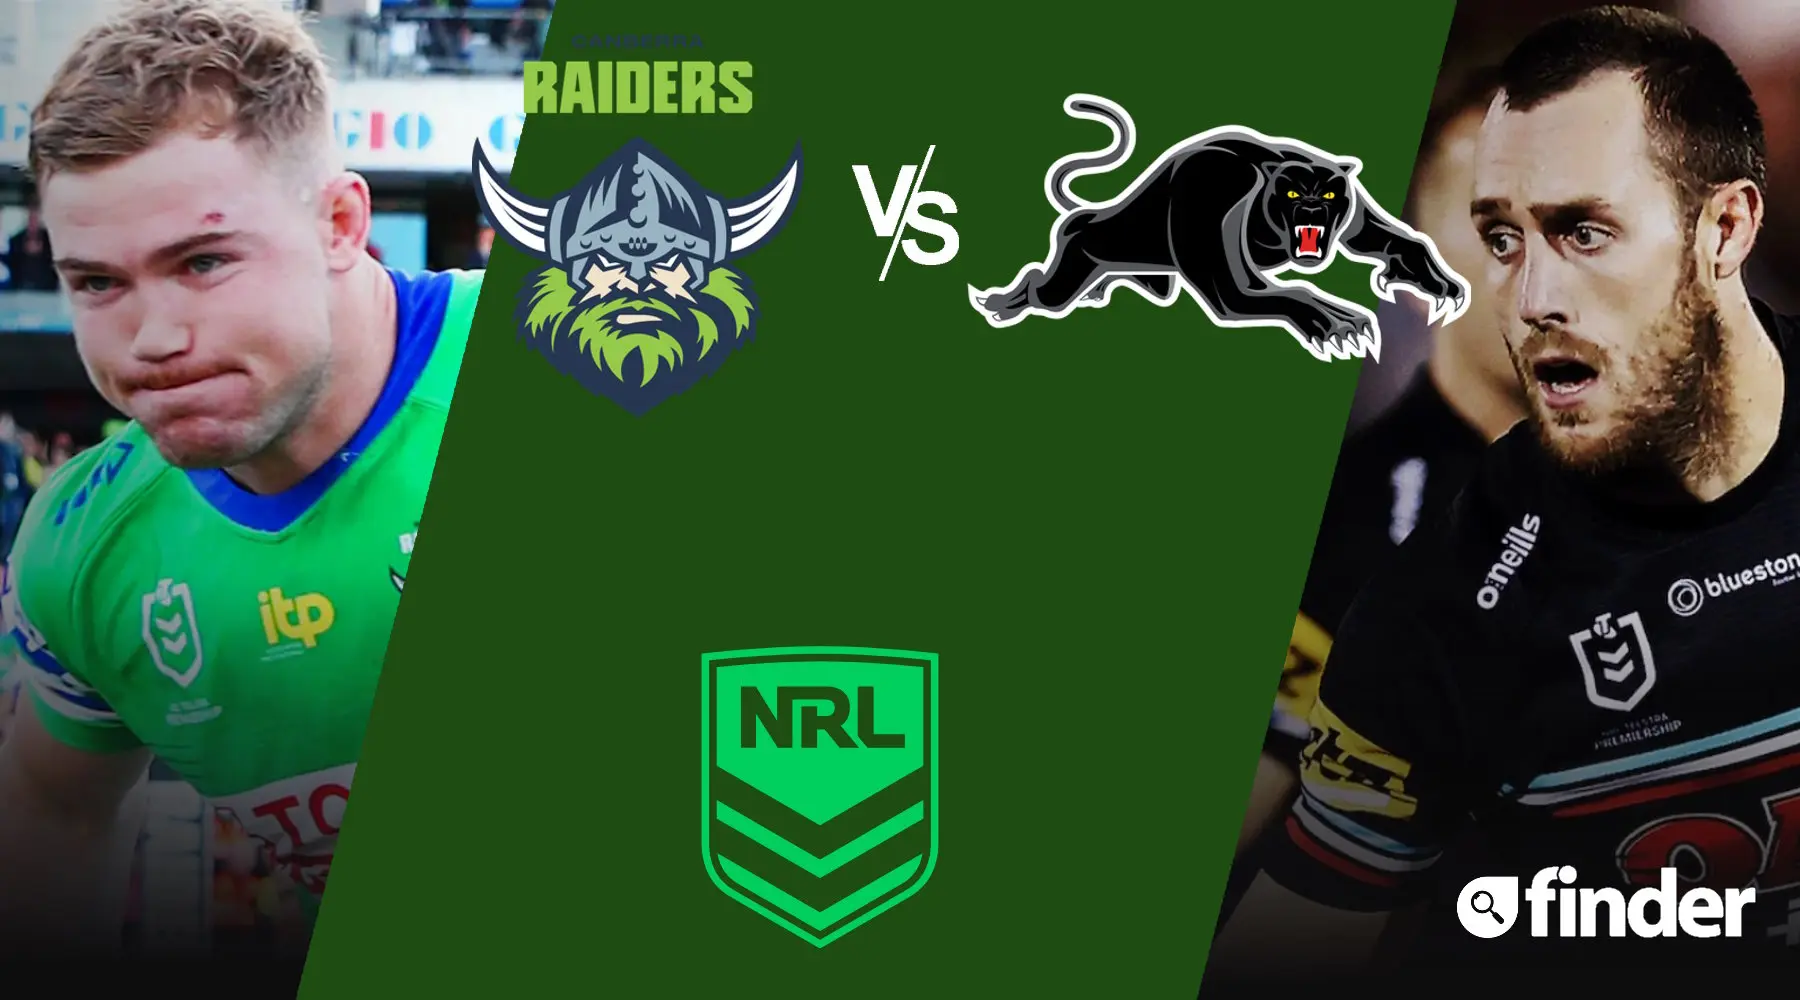 How to watch Raiders vs Panthers NRL live, match preview, kick-off time